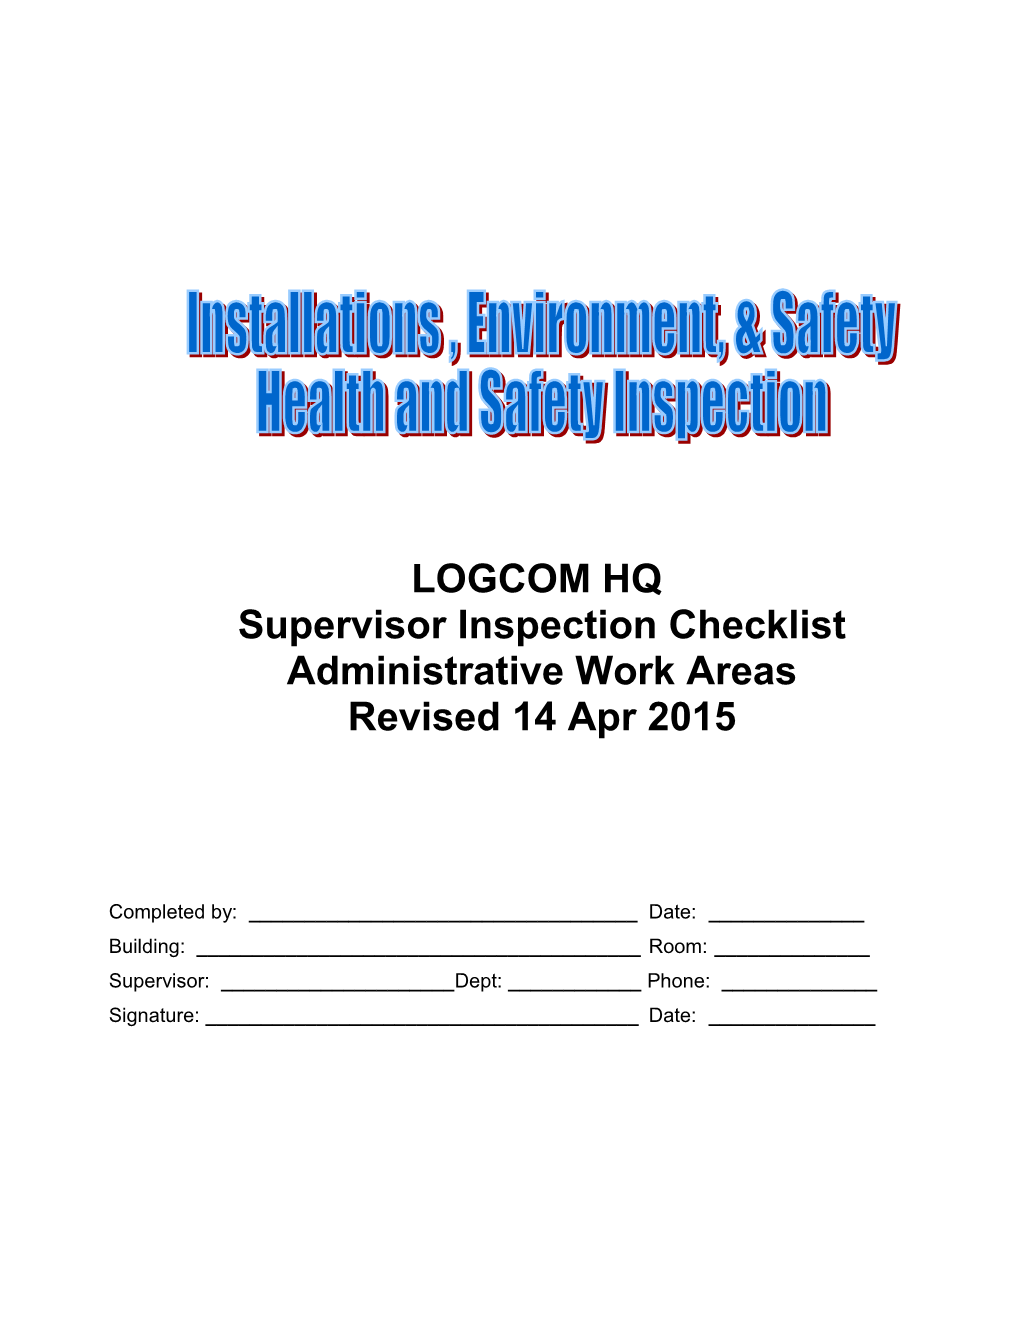 Supervisor Safety Inspection Checklist Administrative Work Areas